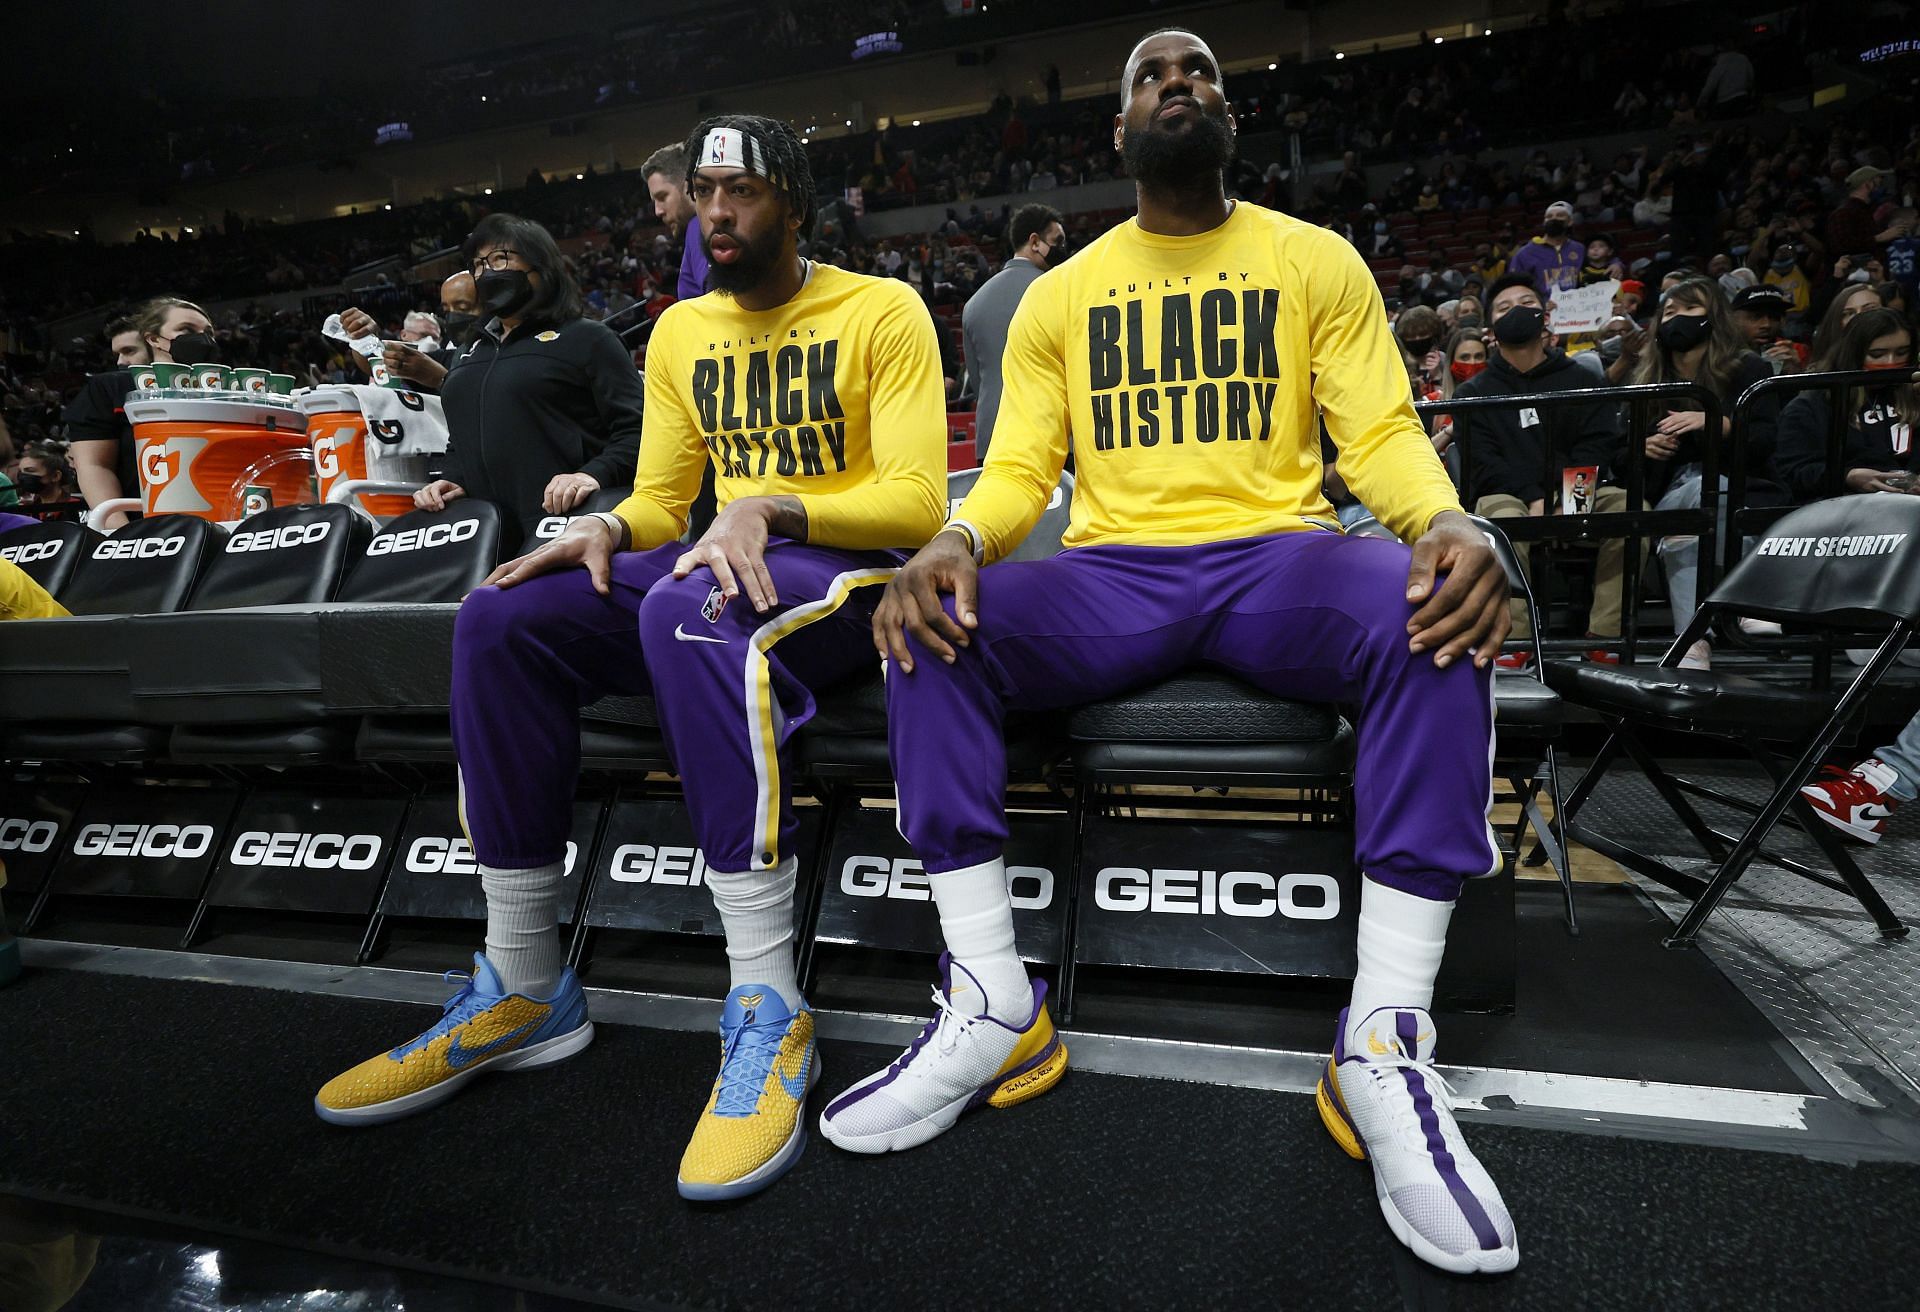 LeBron James (right) and Anthony Davis of the LA Lakers